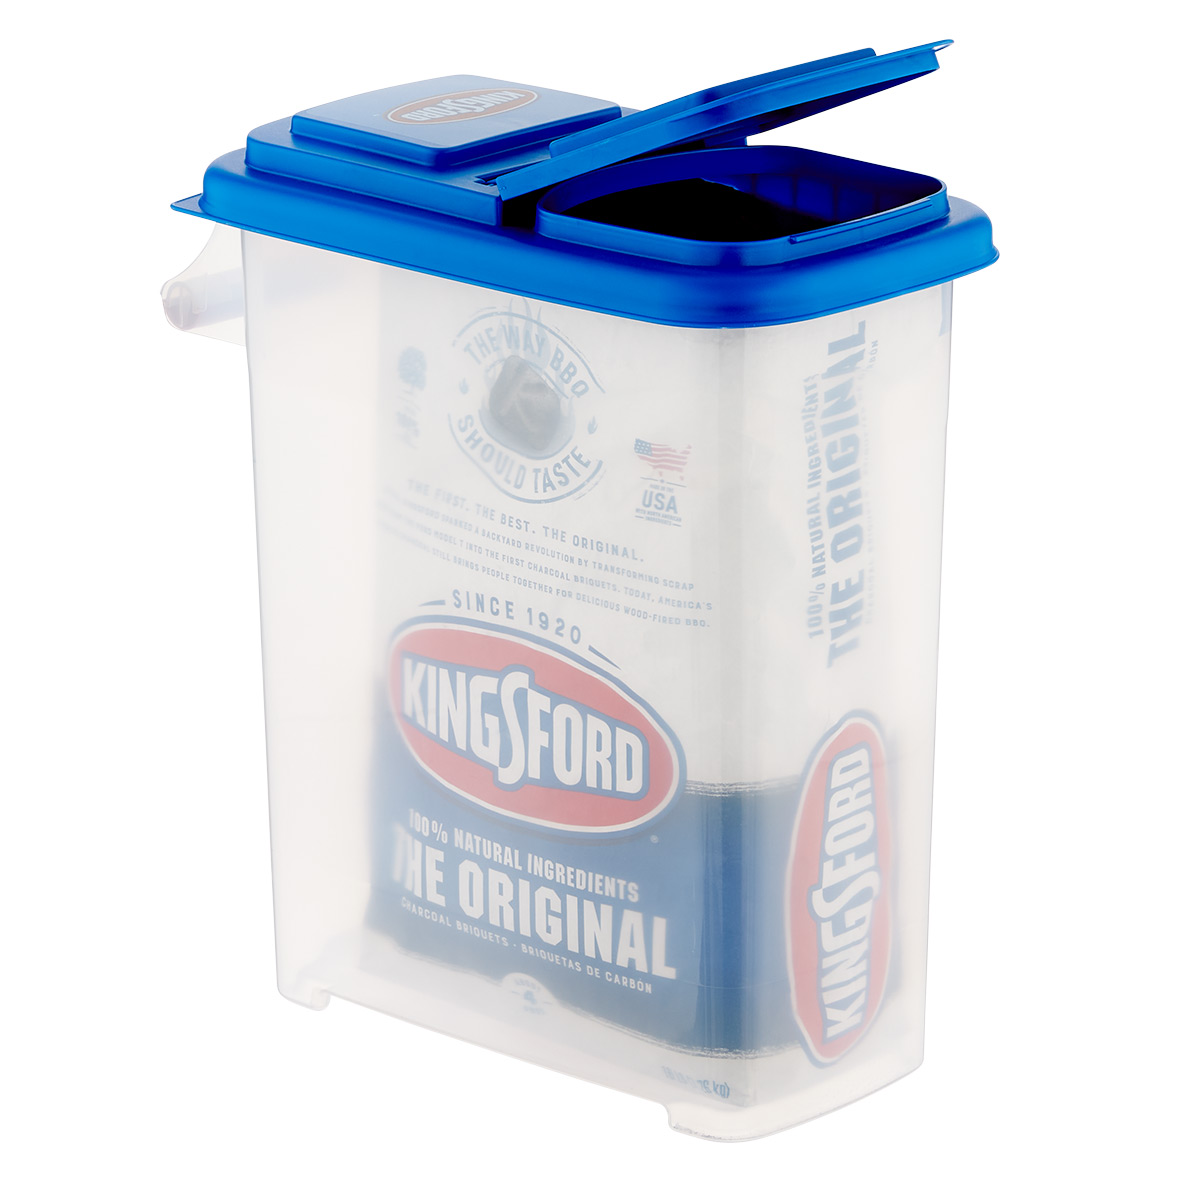 Kingsford Charcoal Caddy Dispenser | The Container Store